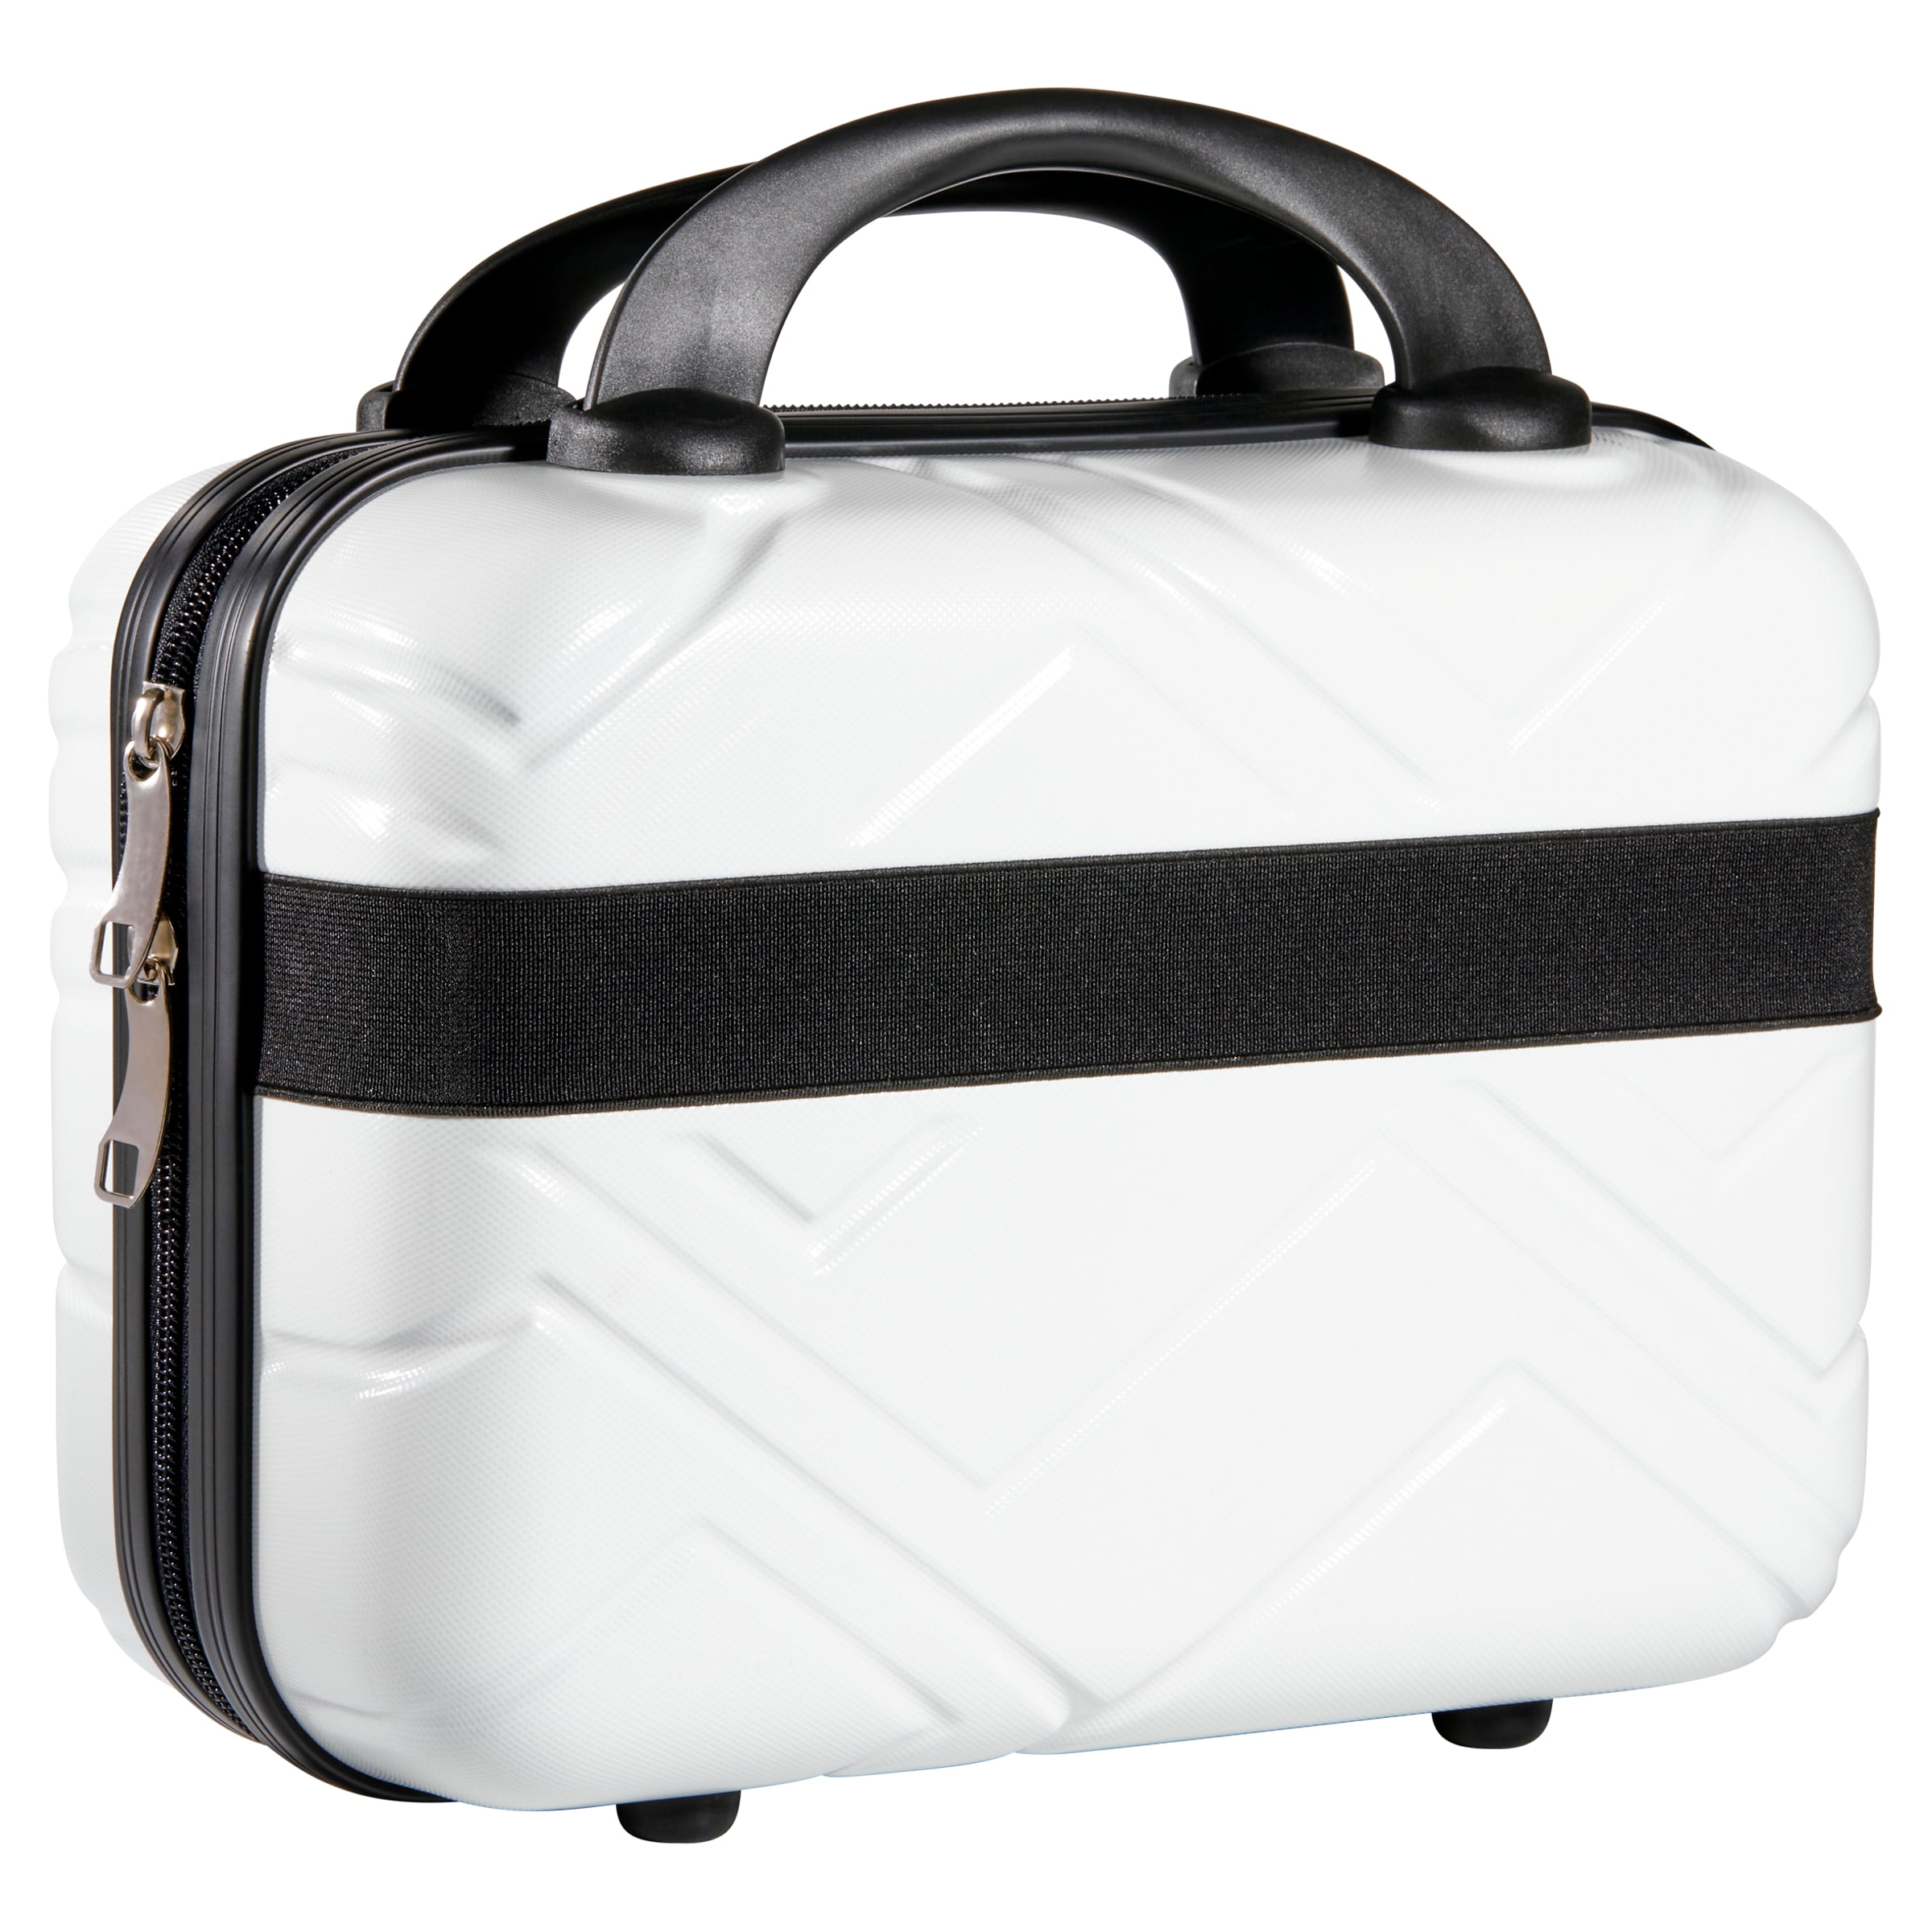 Hard Shell Cosmetic Travel Case, White, 11.8 x 10.82 x 5.9